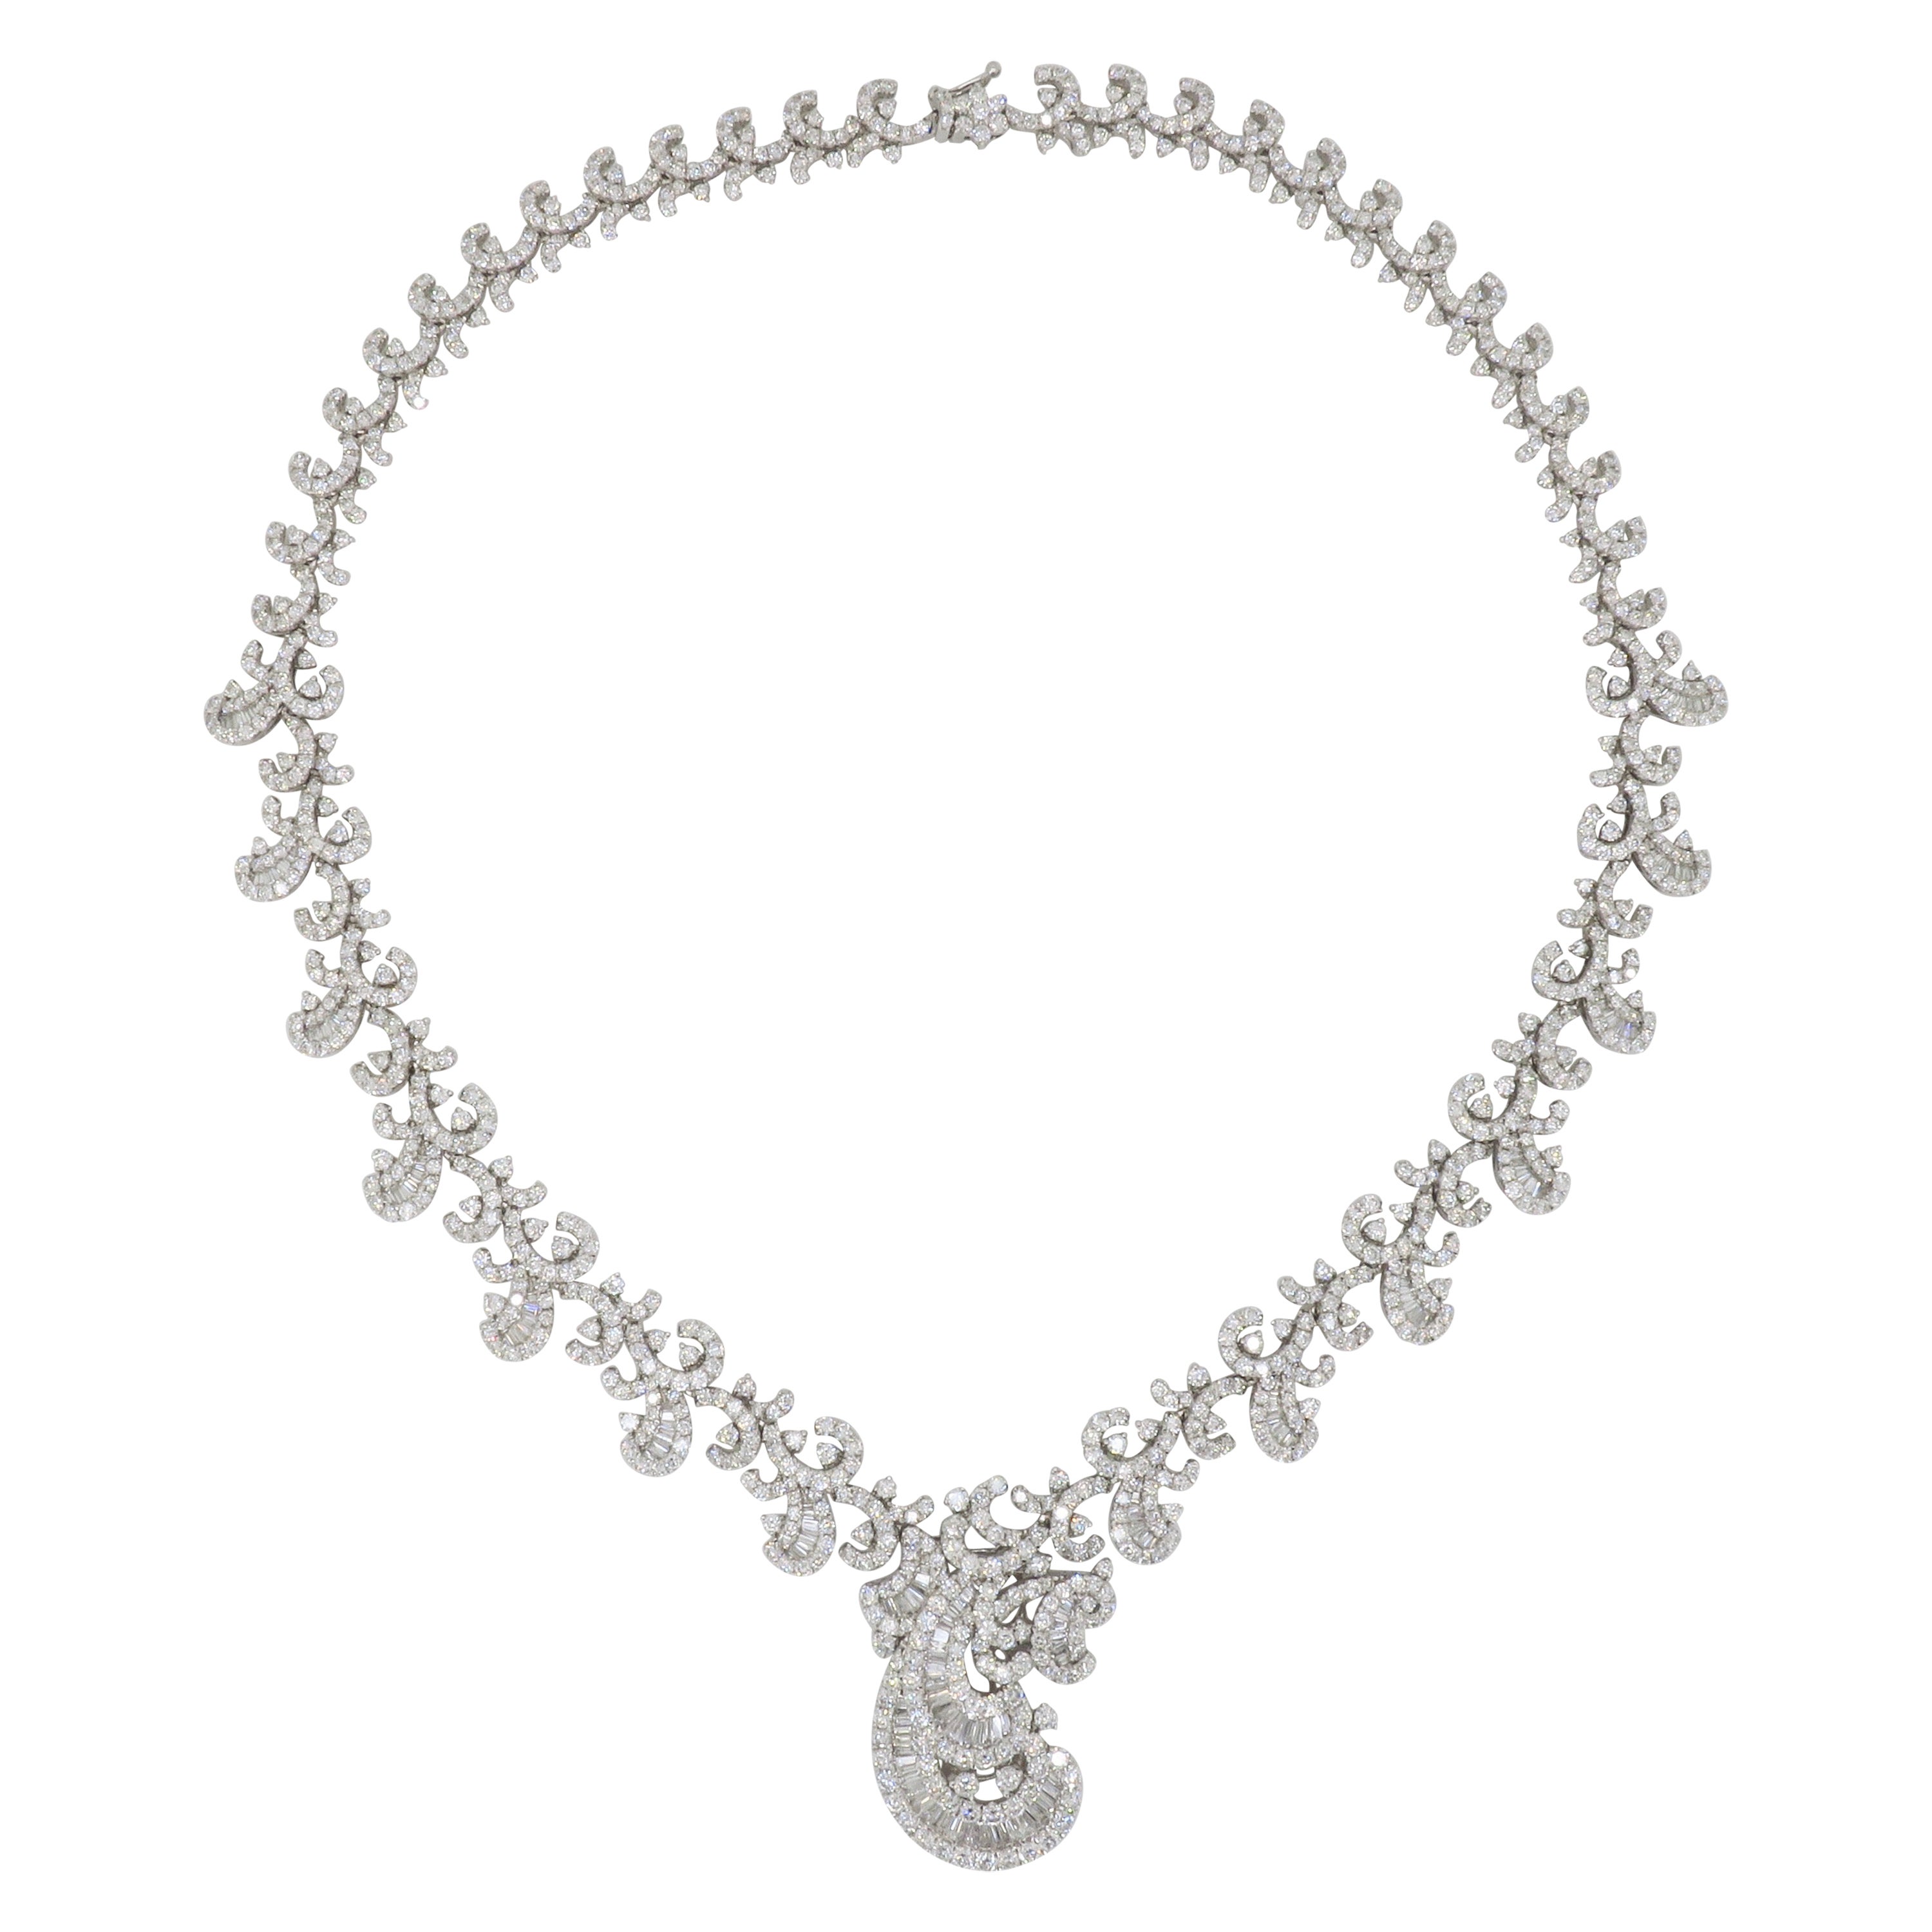 Highly Detailed 18.96CTW Diamond Necklace Made in 18k White Gold 